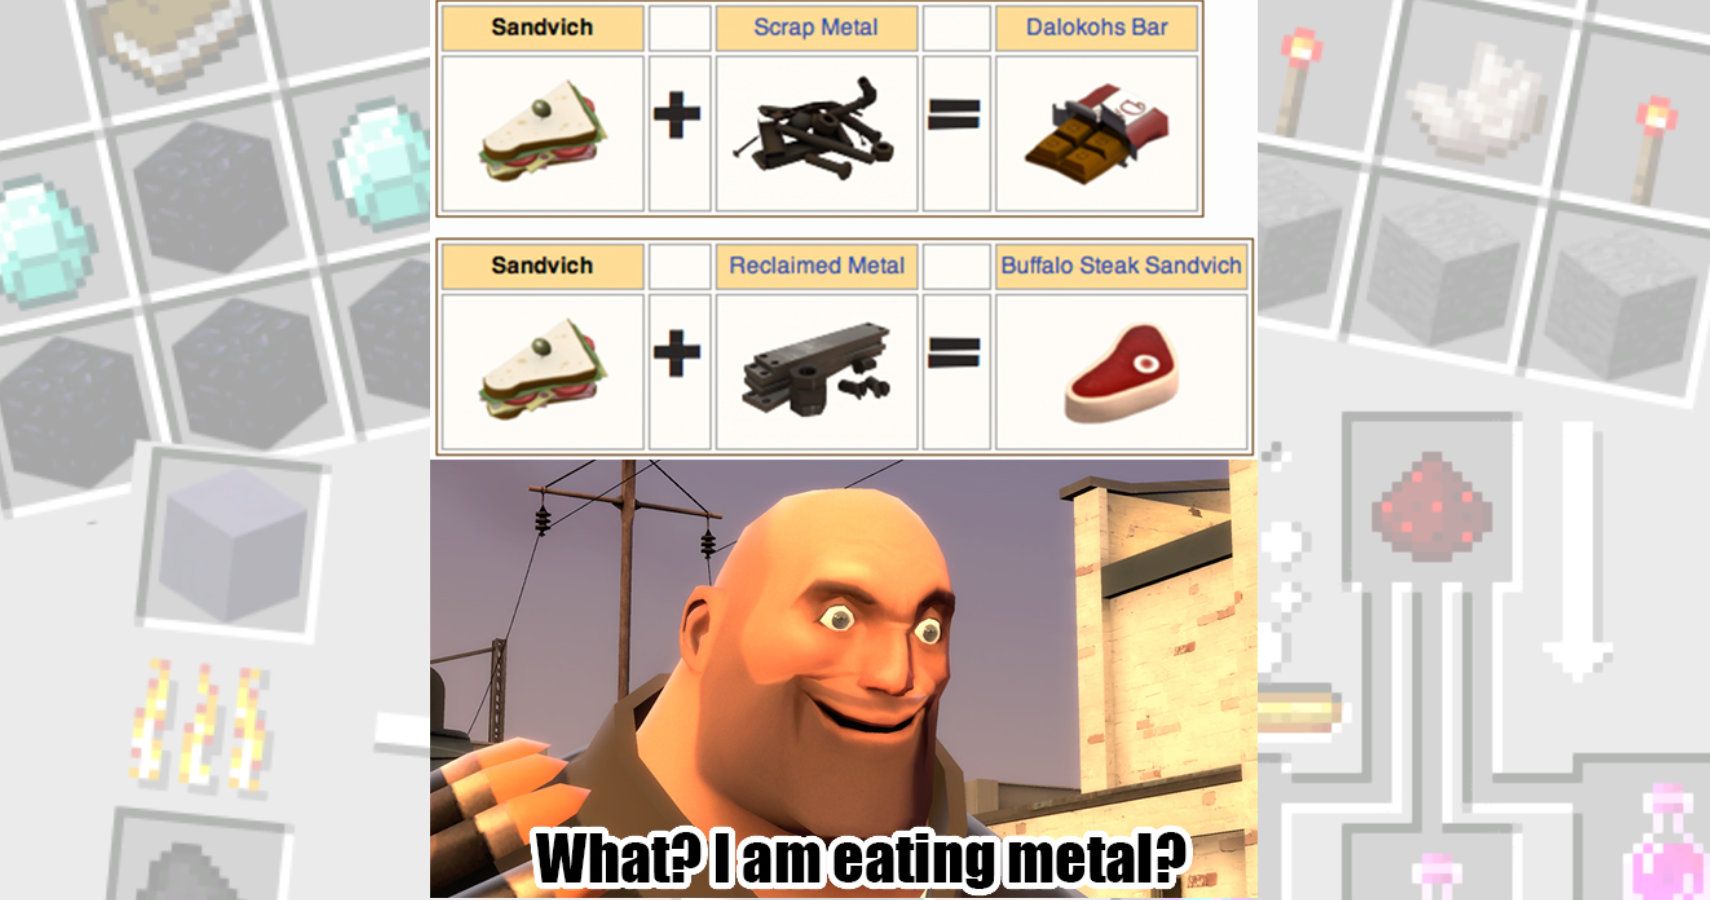 Team Fortress 2 recipes containing iron above an image saying "what, I'm eating metal?"